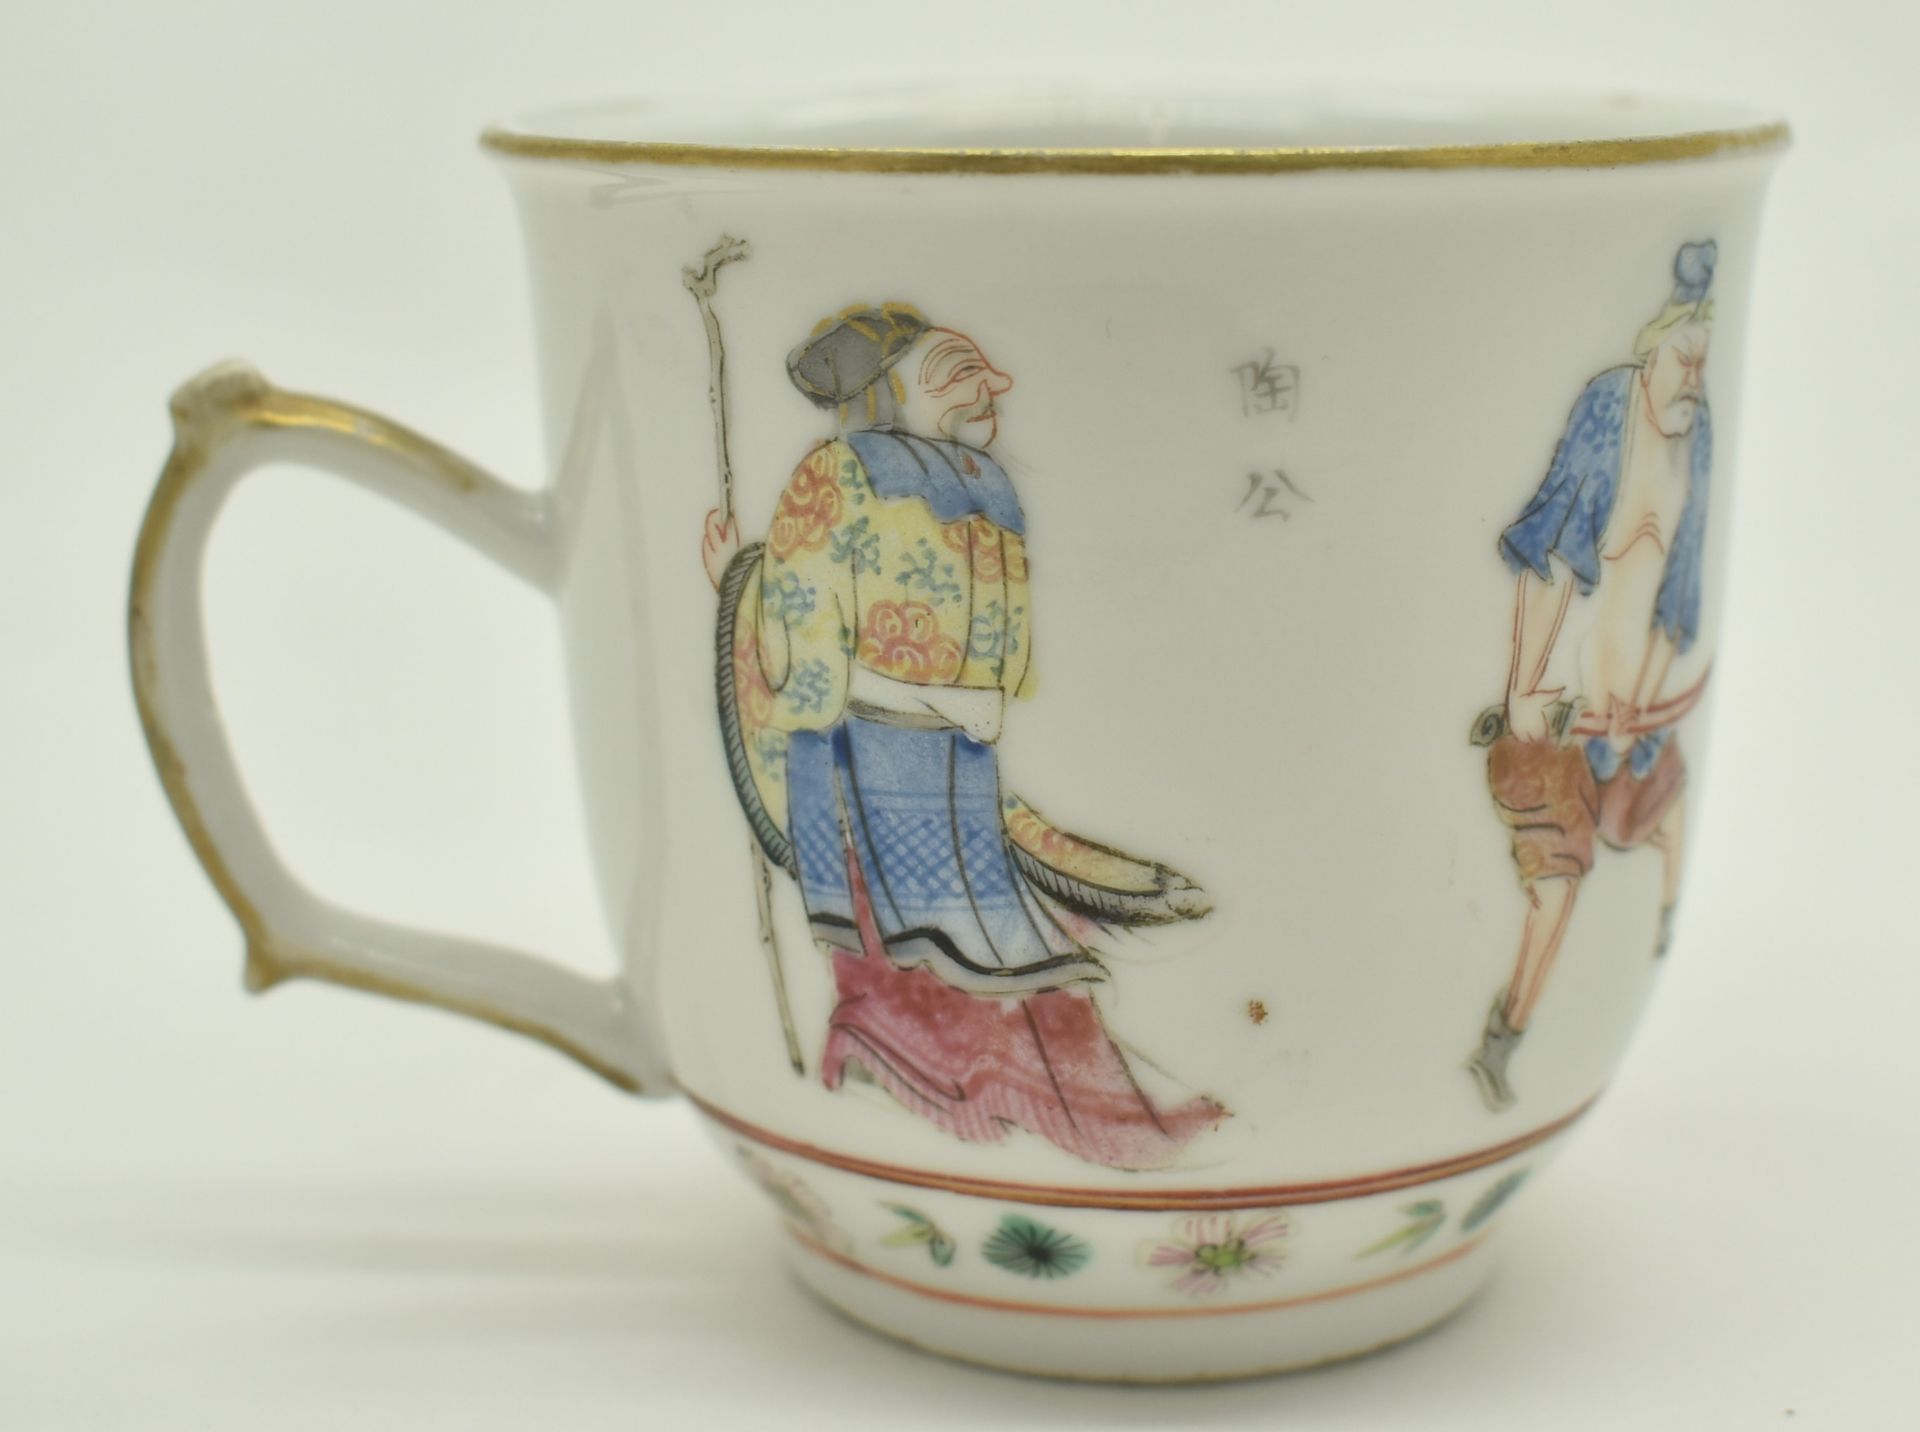 FAMILLE ROSE WU SHUANG PU CUP WITH HANDLE 道光粉彩无双谱人物杯 - Image 5 of 13